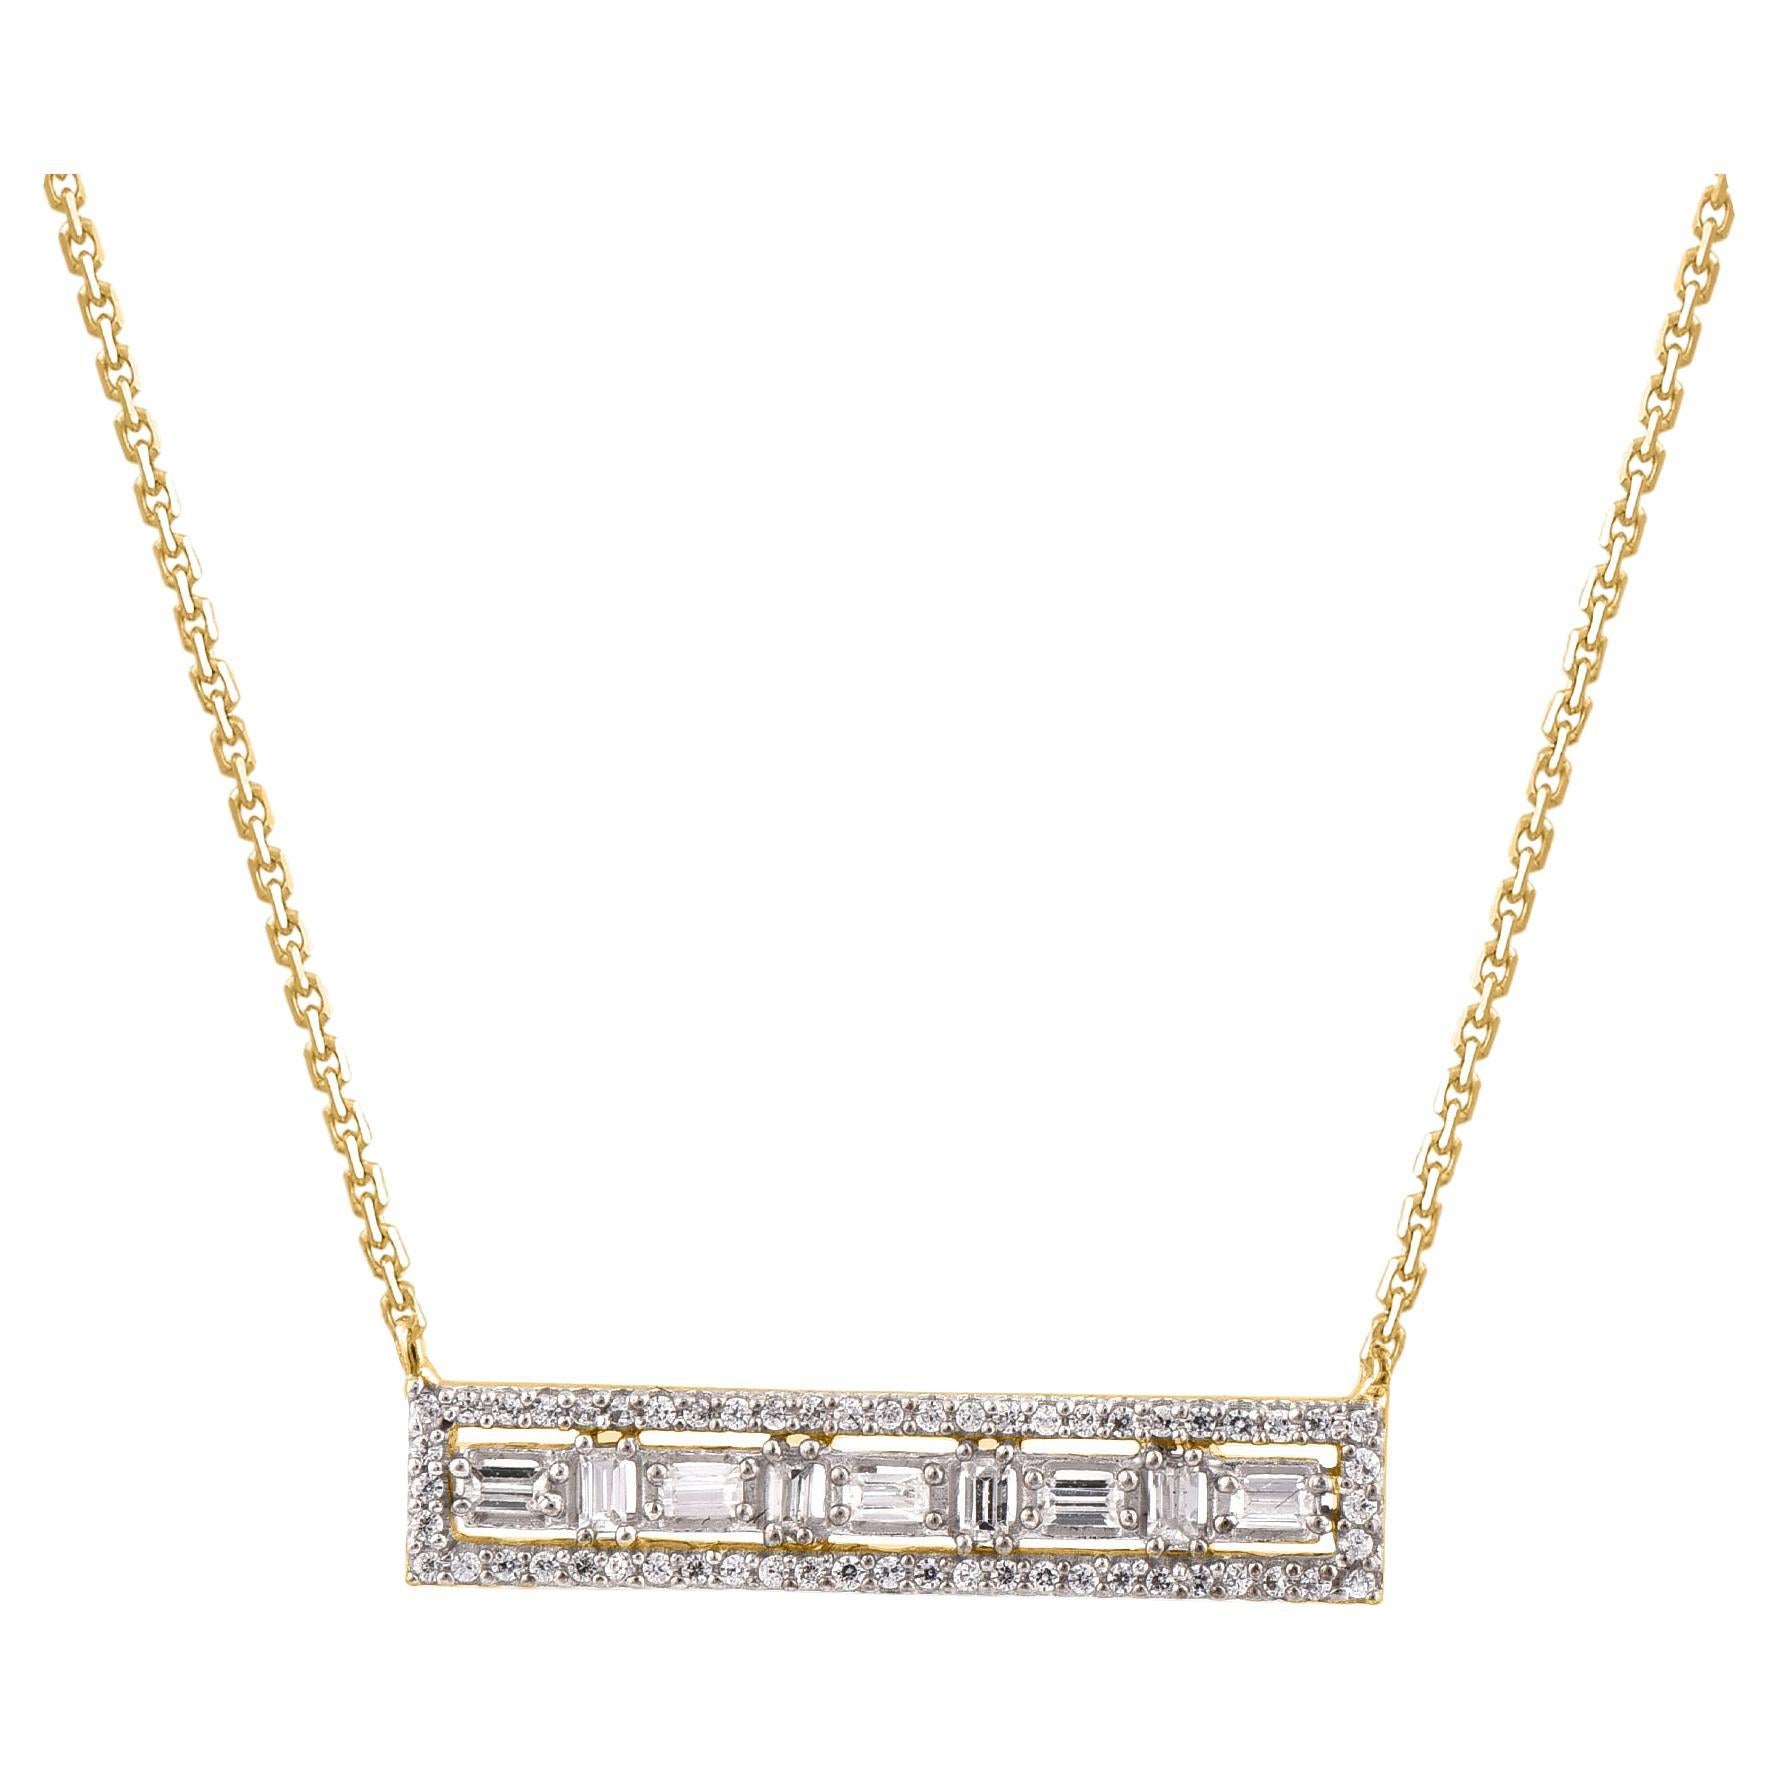 TJD 0.25 Carat Natural Round & Baguette Diamond 18KT Yellow Gold Bar Necklace For Sale